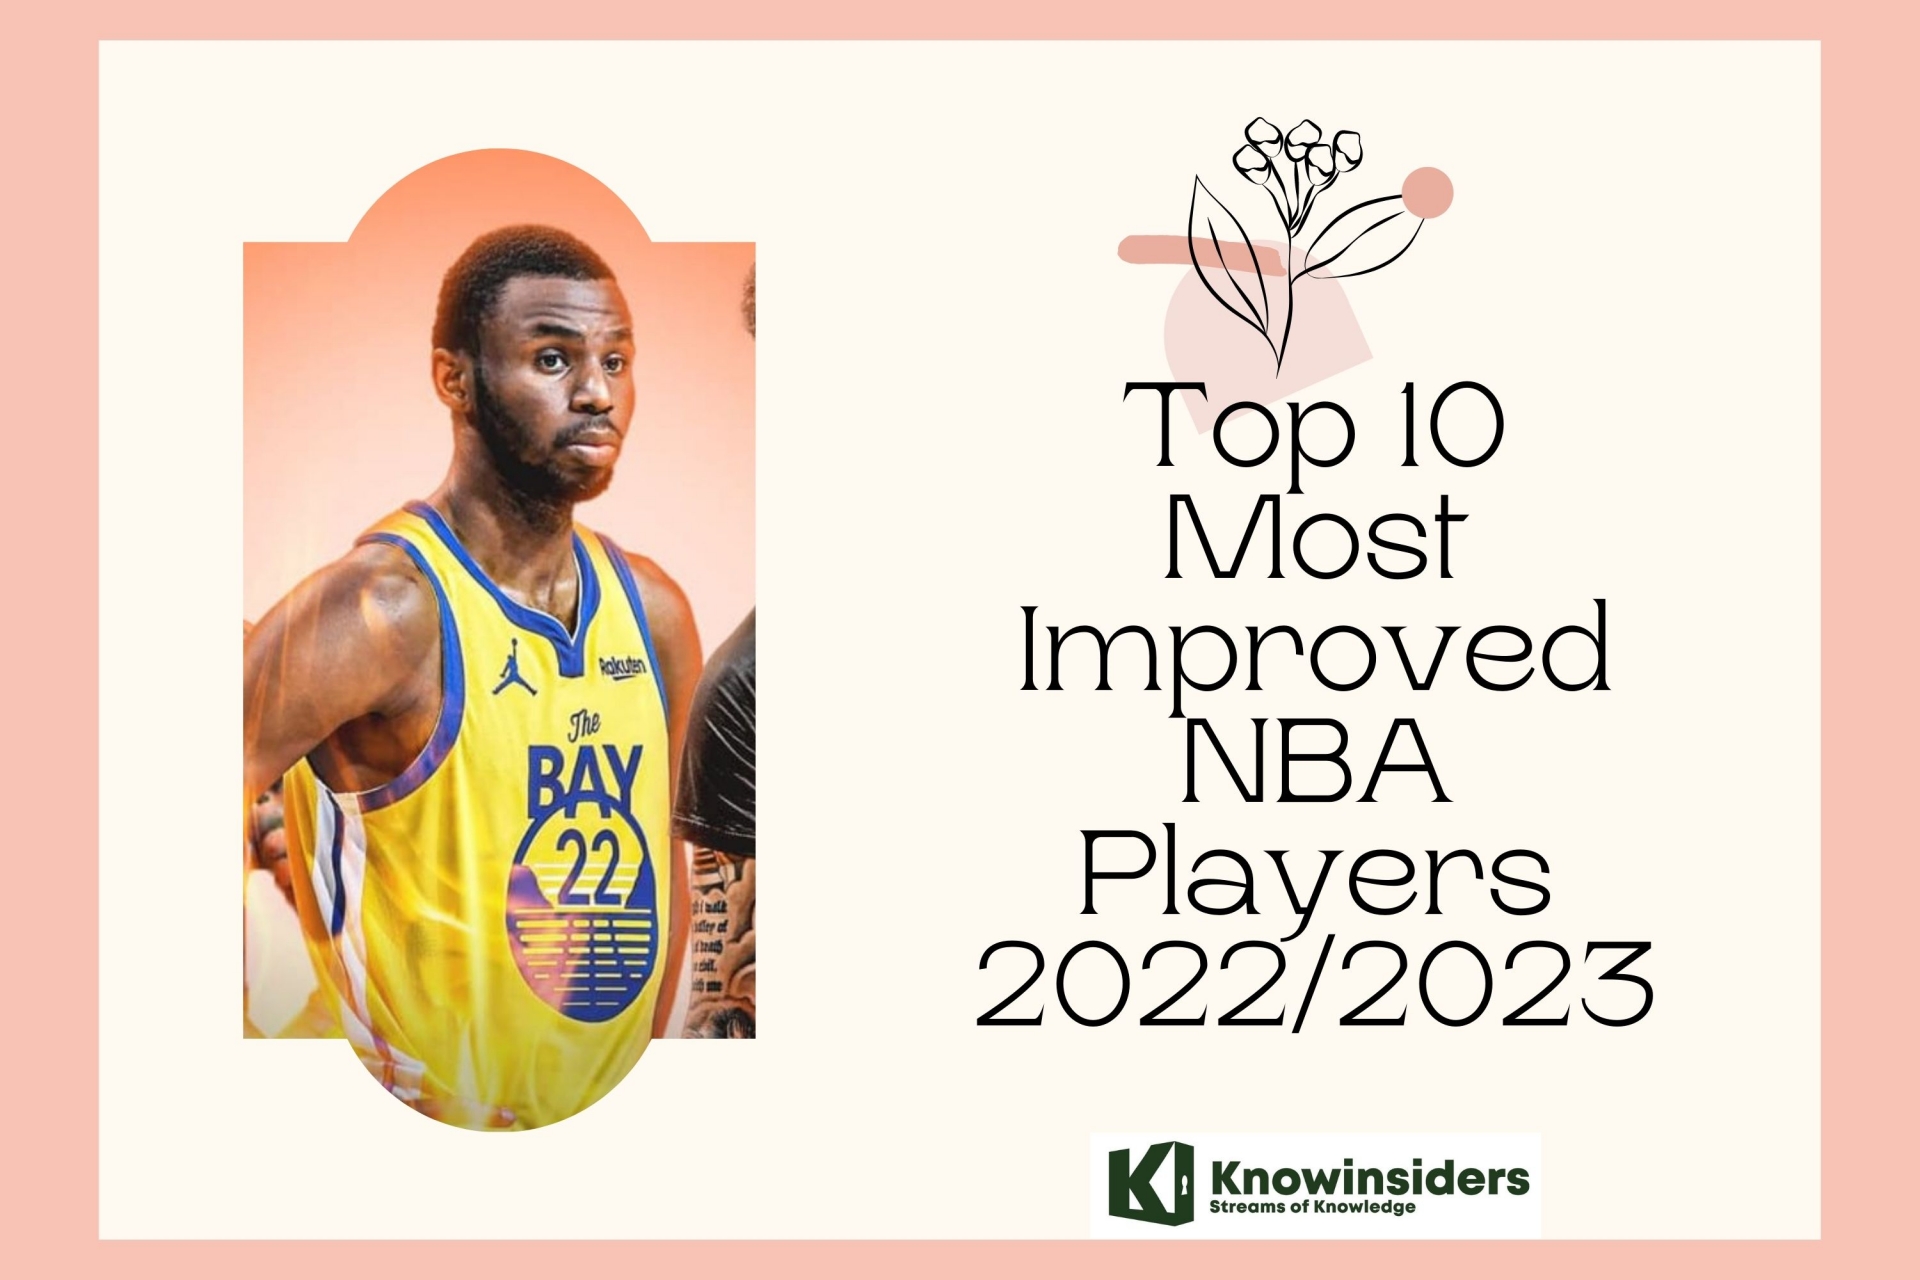 Top 10 Most Improved NBA Players in 2022/2023